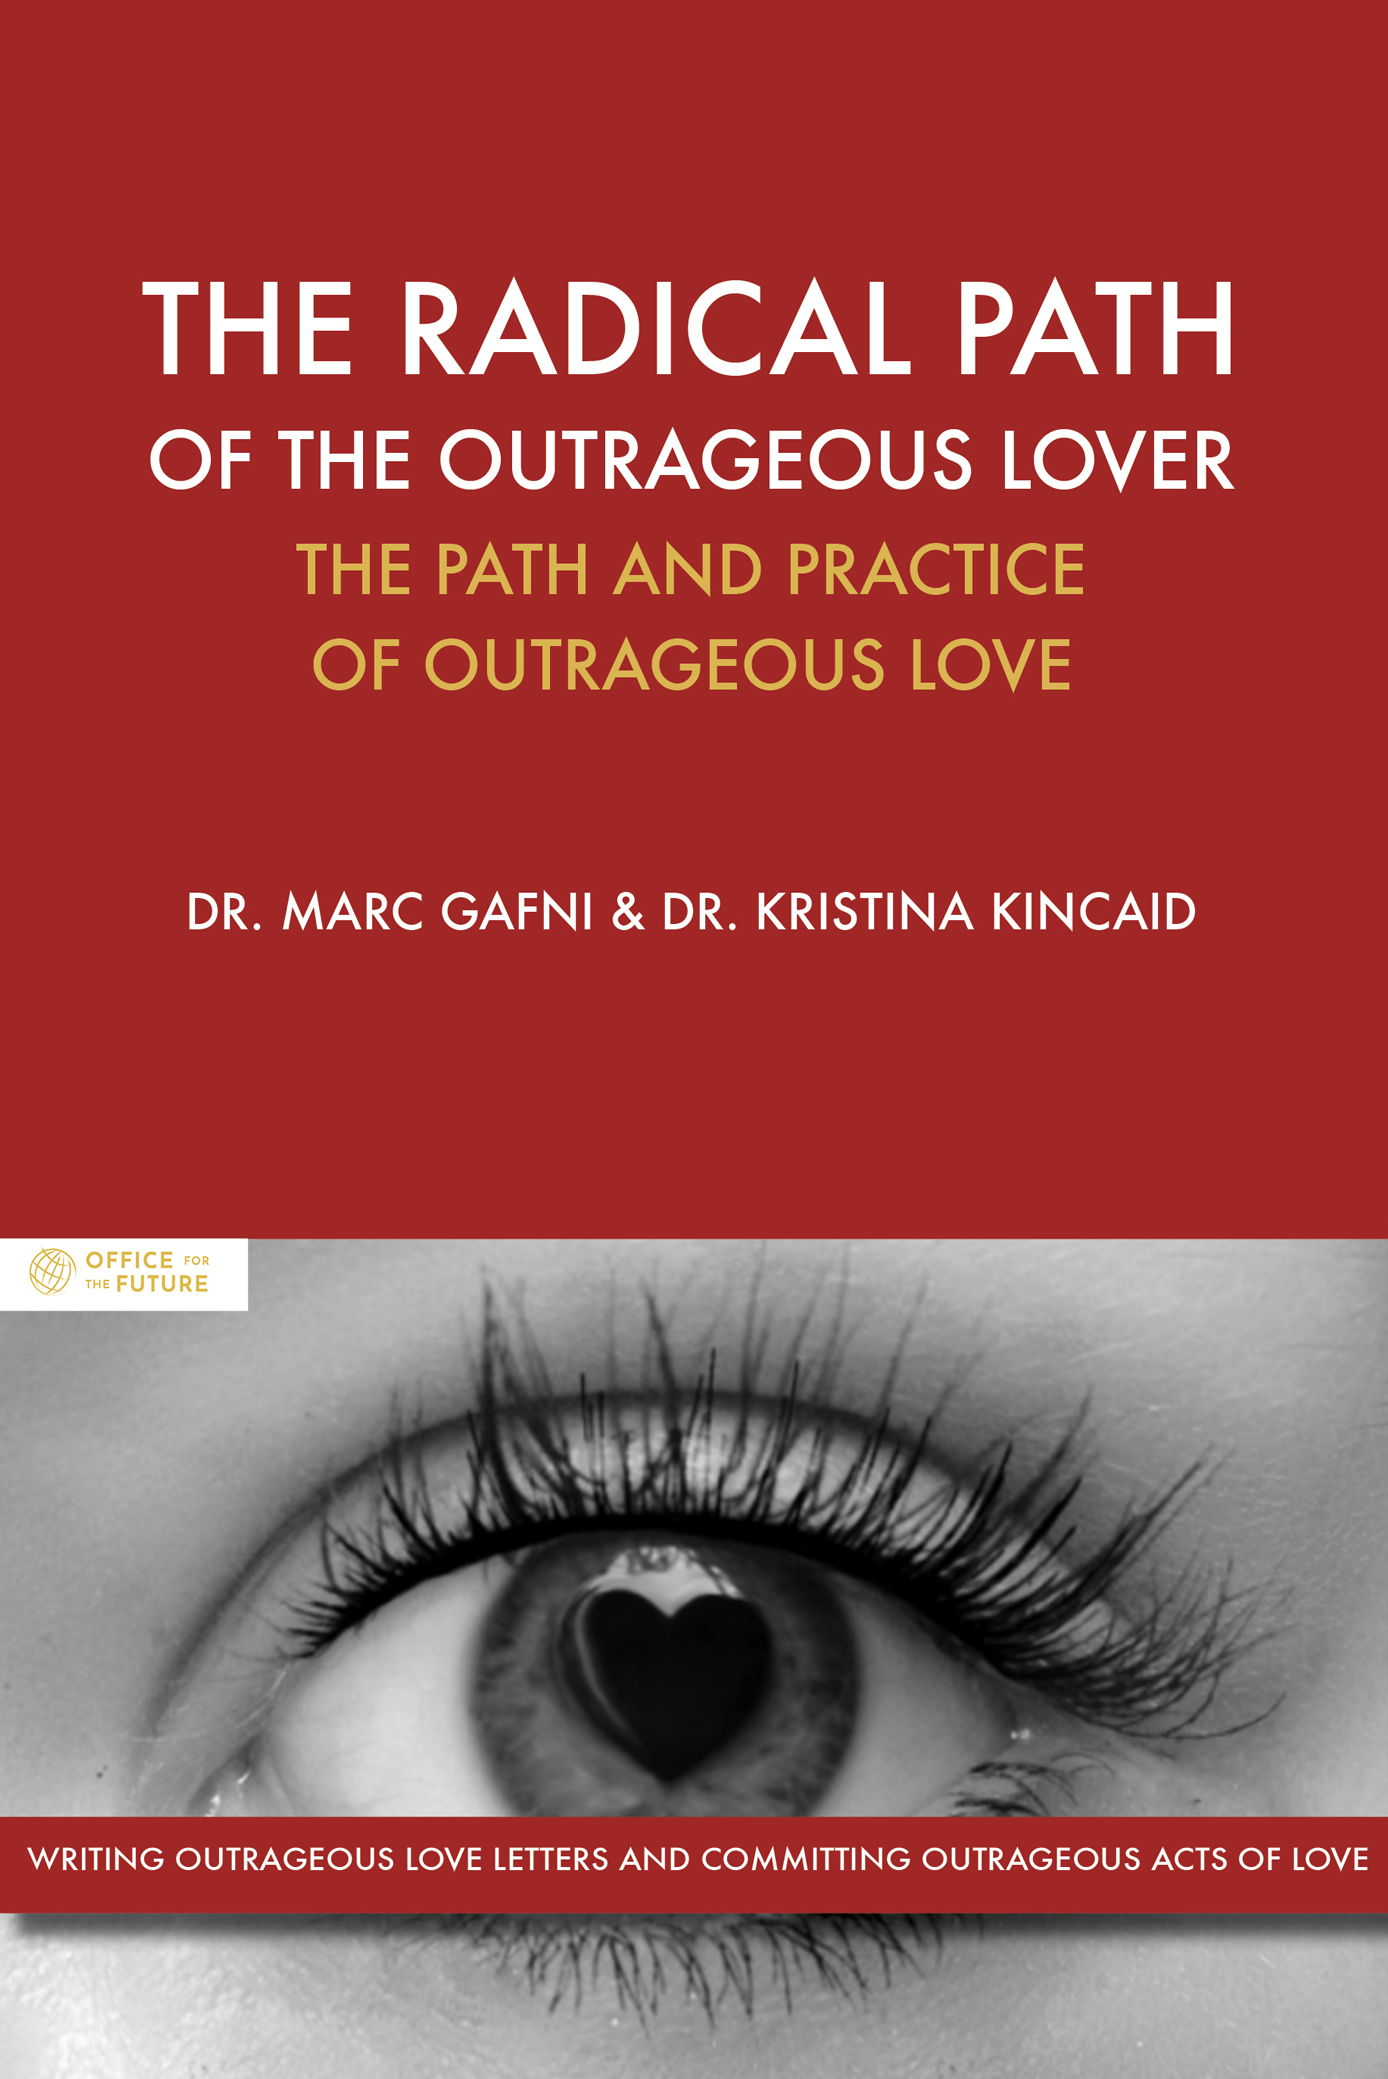 The radical path of the outrageous lover